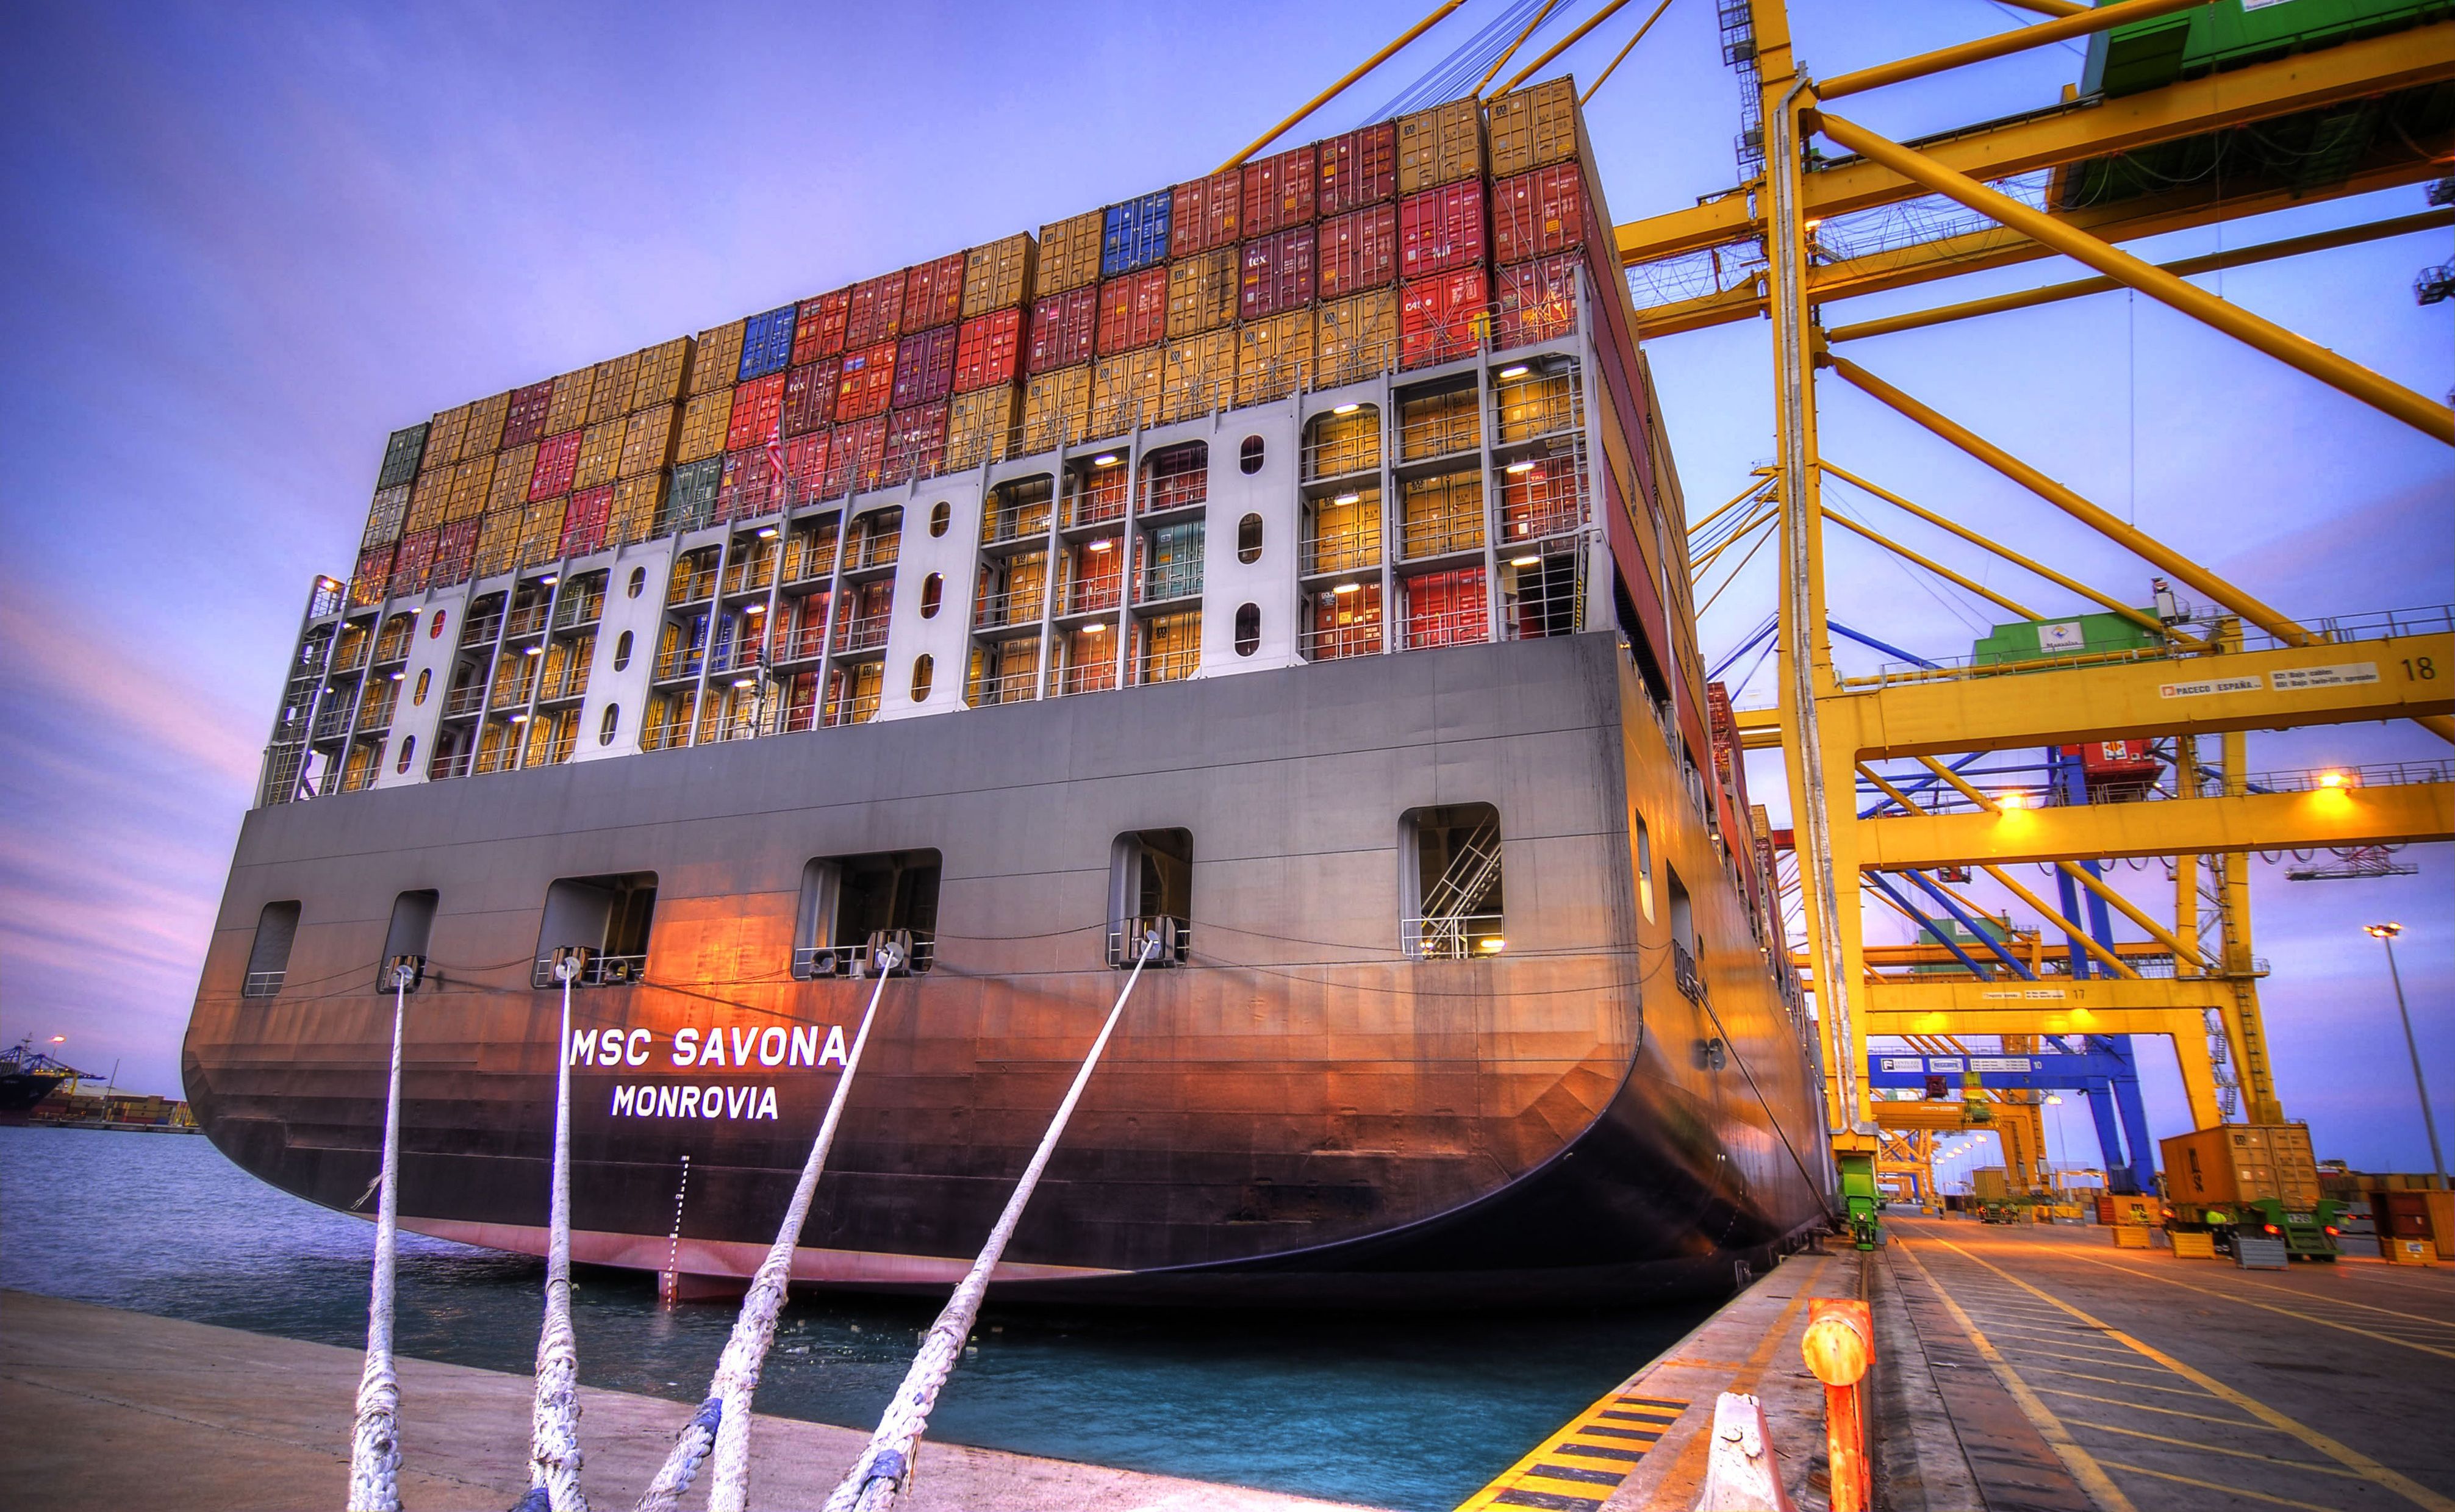 Download Wallpaper sea ship water port sky terminal the msc savona container, 4025x Cargo container company Msc savona